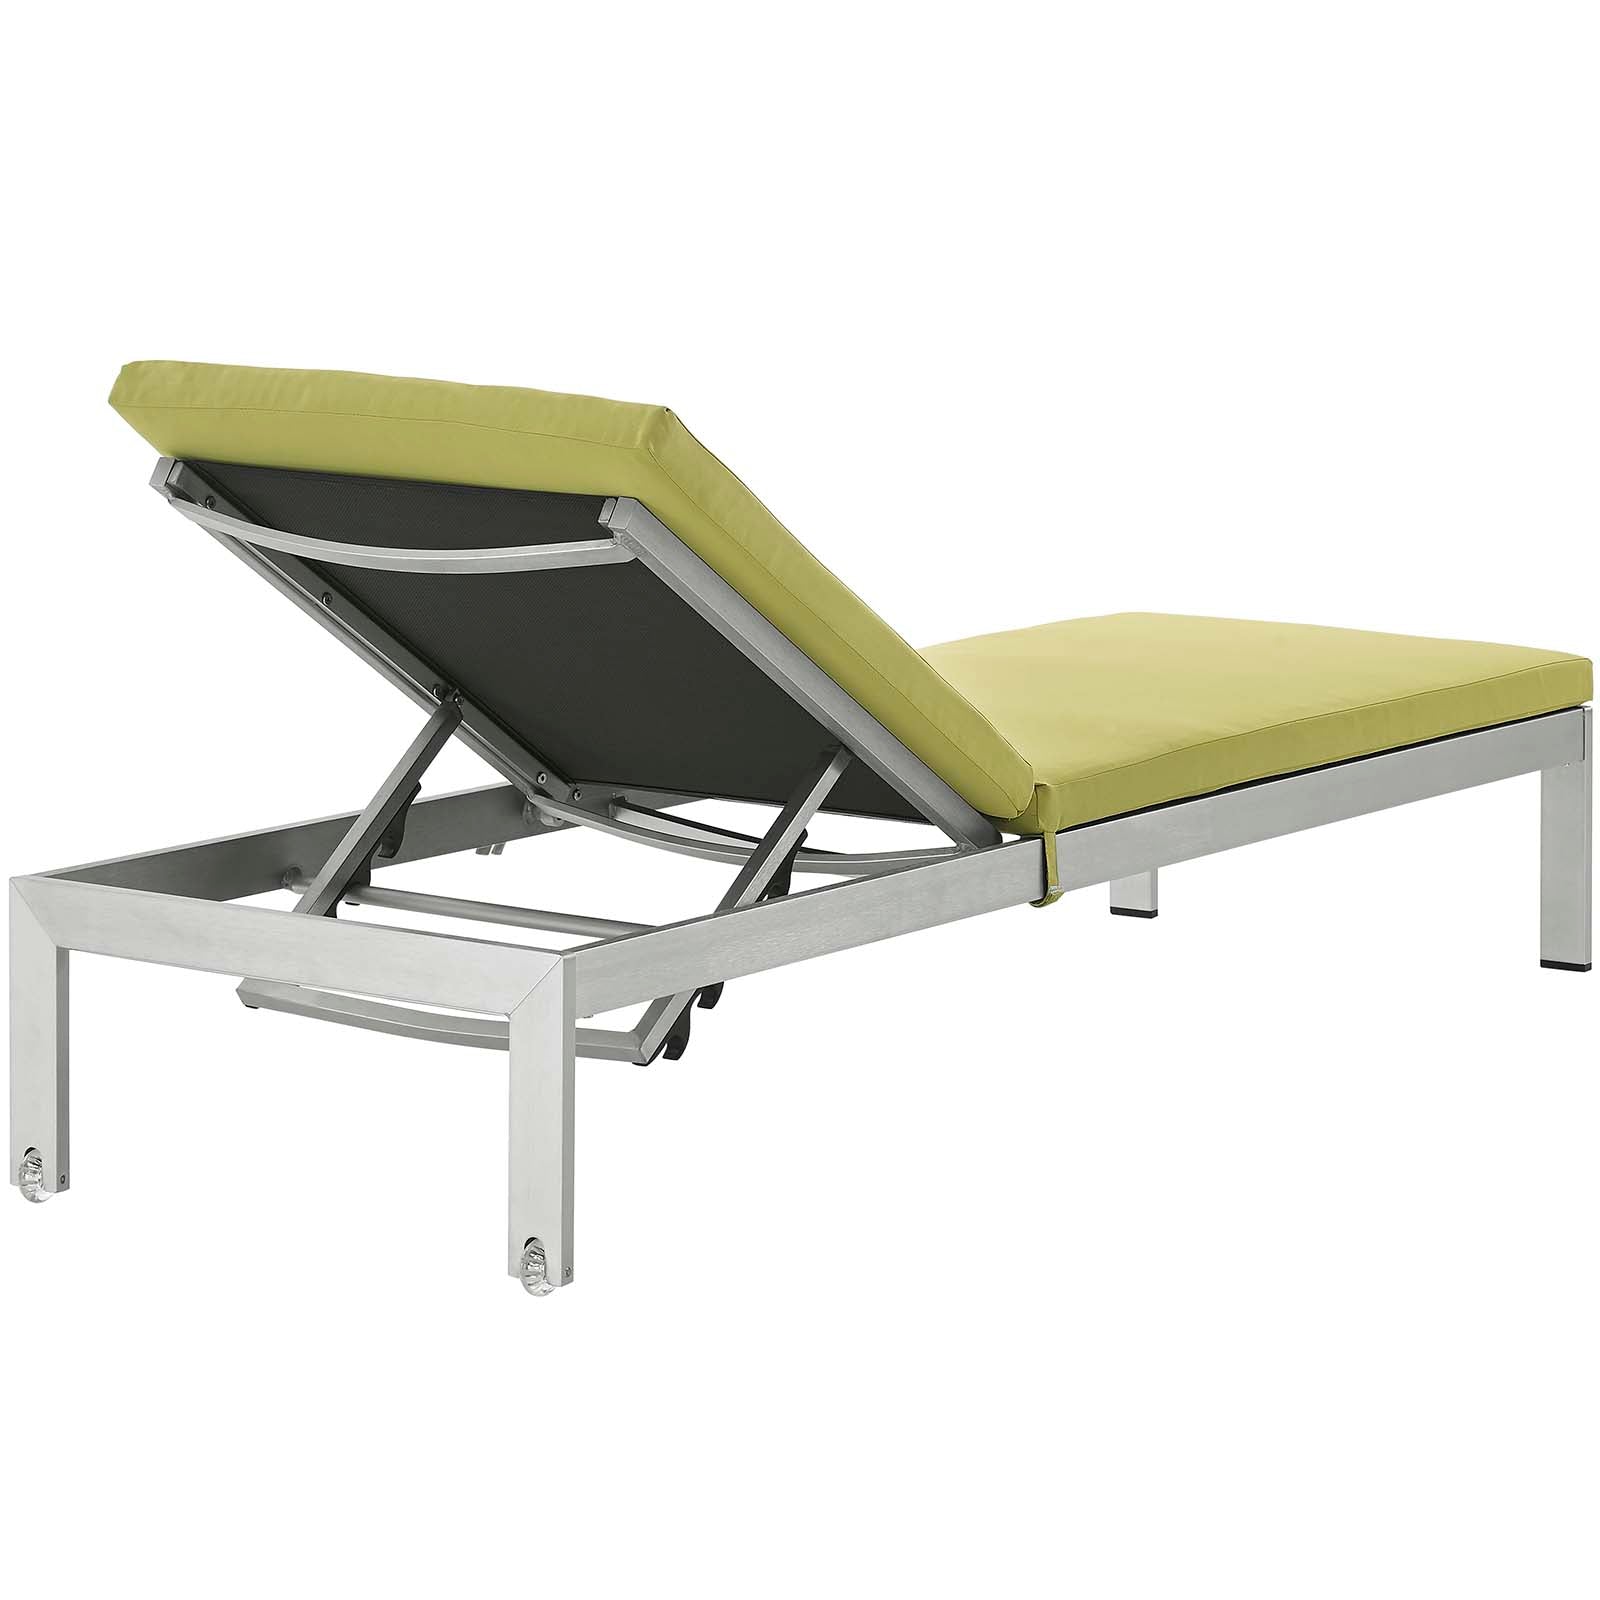 Modway - Shore Chaise with Cushions Outdoor Patio Aluminum Set of 6 - EEI-2739